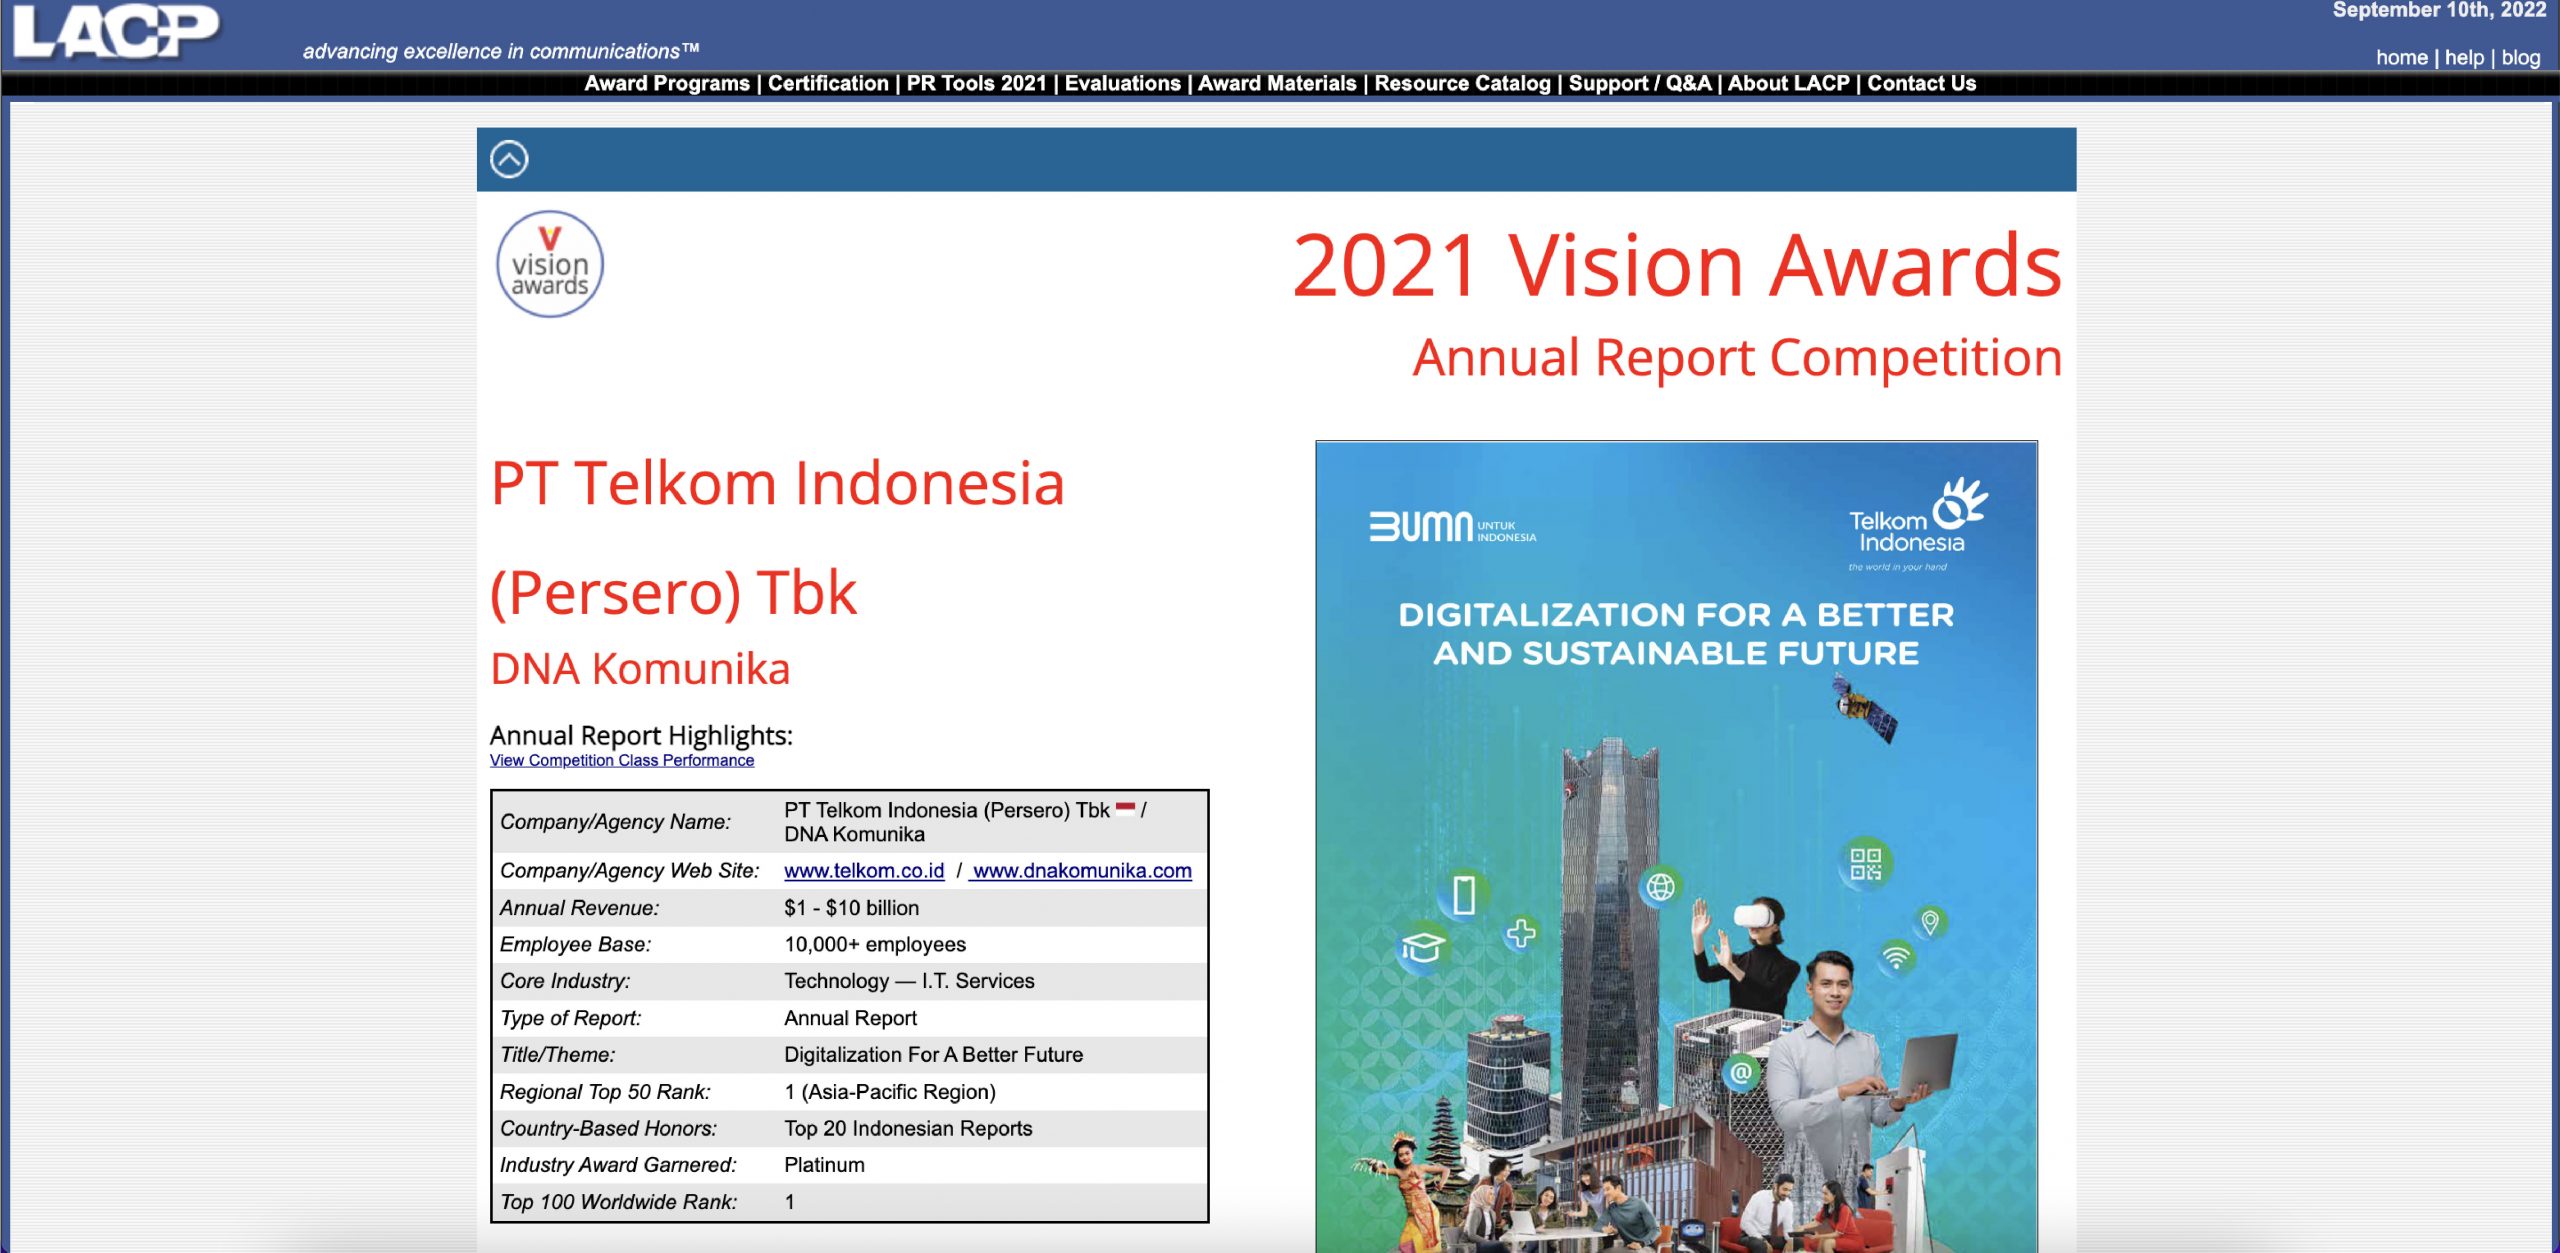 Telkom Indonesia Annual Report Highlights, LACP Annual Report Award 2022.